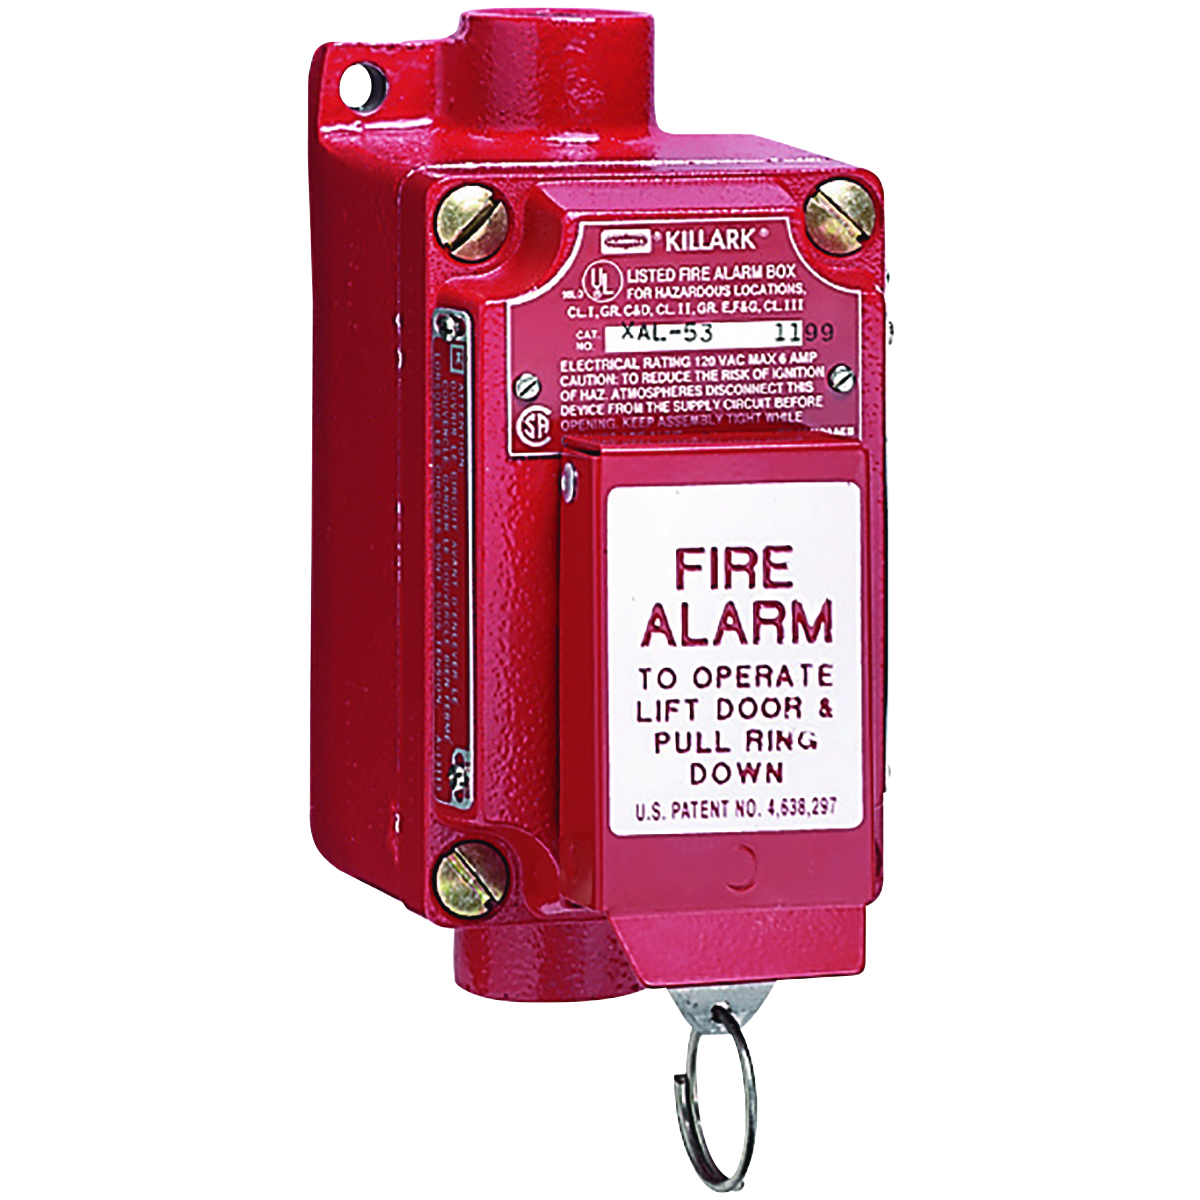 XAL SERIES - ALUMINUM FEED-THRU FIRE ALARM STATION WITH PULL-RINGACTIVATION - HUB SIZE 3/4 INCH NPT - 1NO/1NC CONTACT RATING